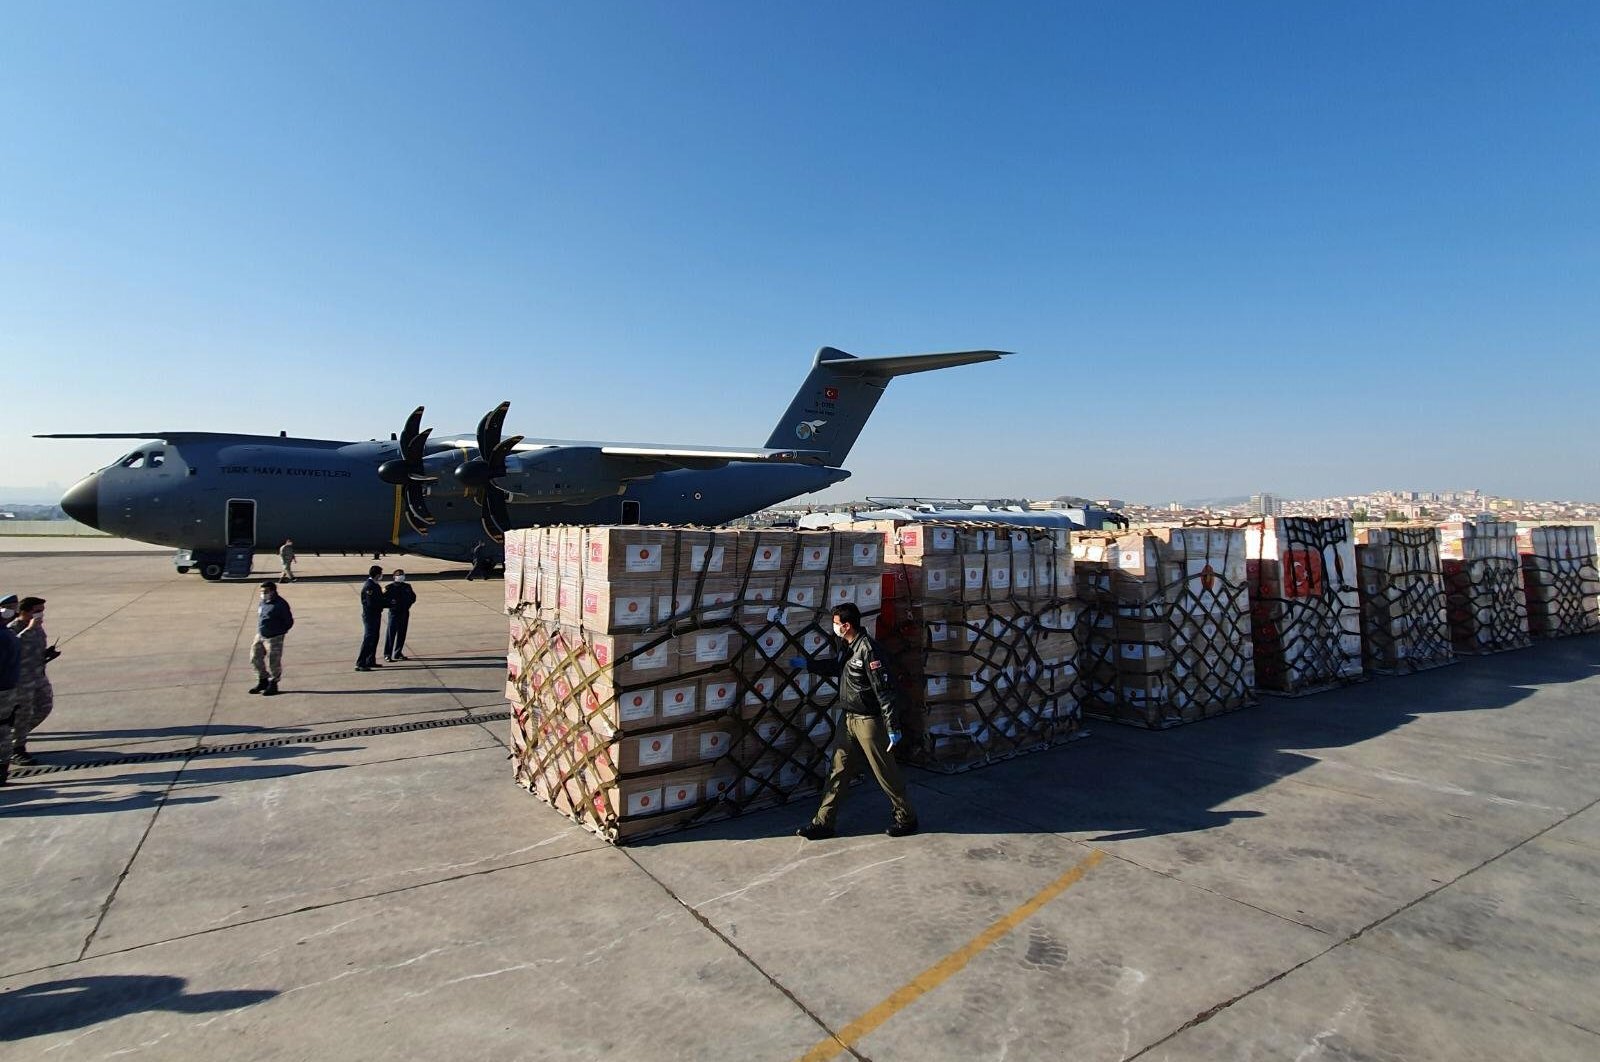 A Turkish military cargo plane and a shipment of medical supplies, part of a major aid campaign by Turkey which has dispatched supplies to dozens of countries since the coronavirus pandemic erupted, are seen at Etimesgut airport before departing for the United States, Ankara, April 28, 2020. (REUTERS Photo)